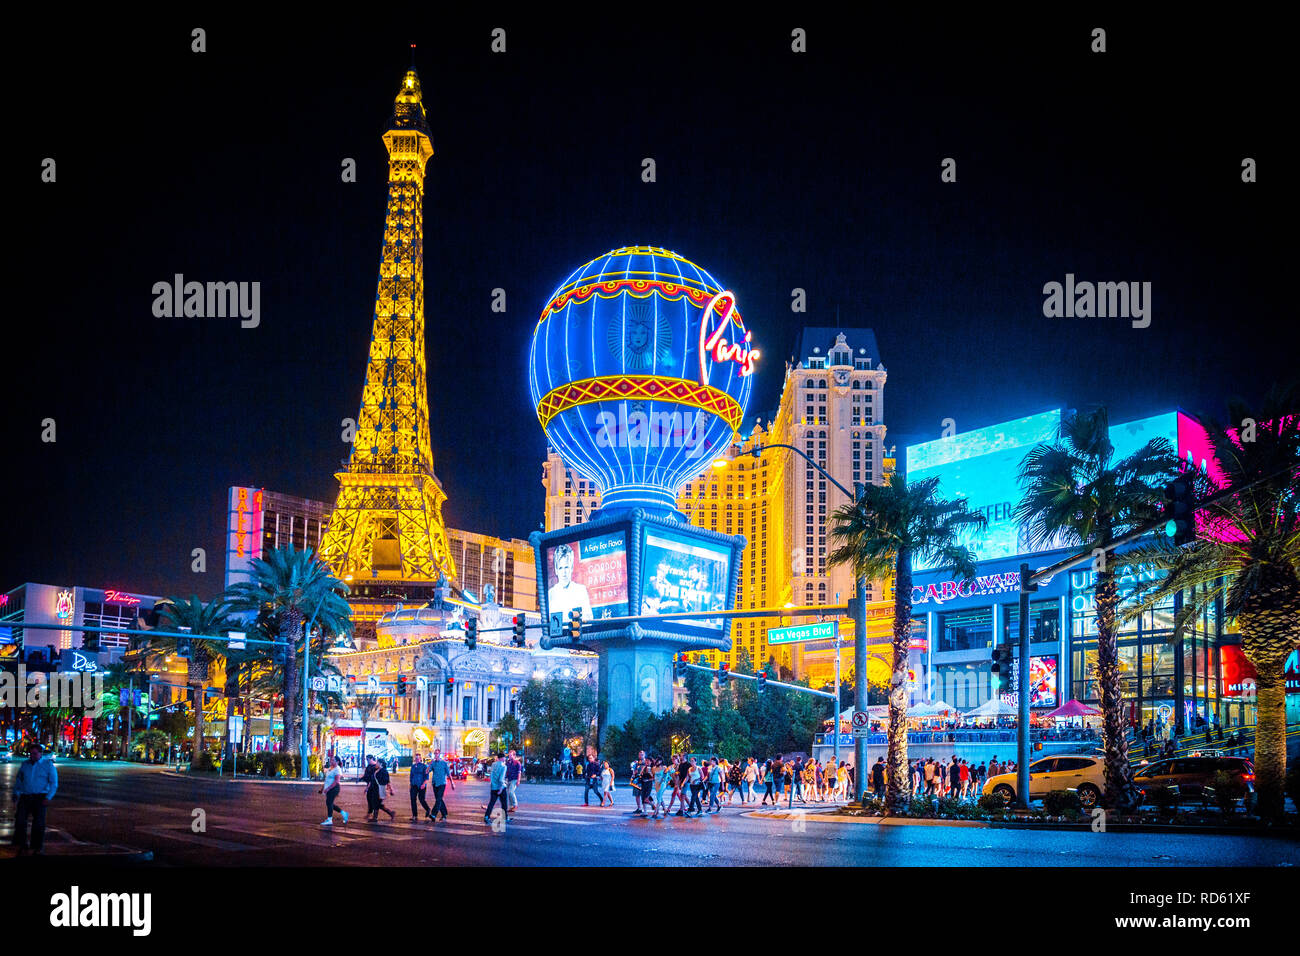 Classic view of colorful Downtown Las Vegas with world famous Strip and Paris Las Vegas hotel and casino complex at night Stock Photo